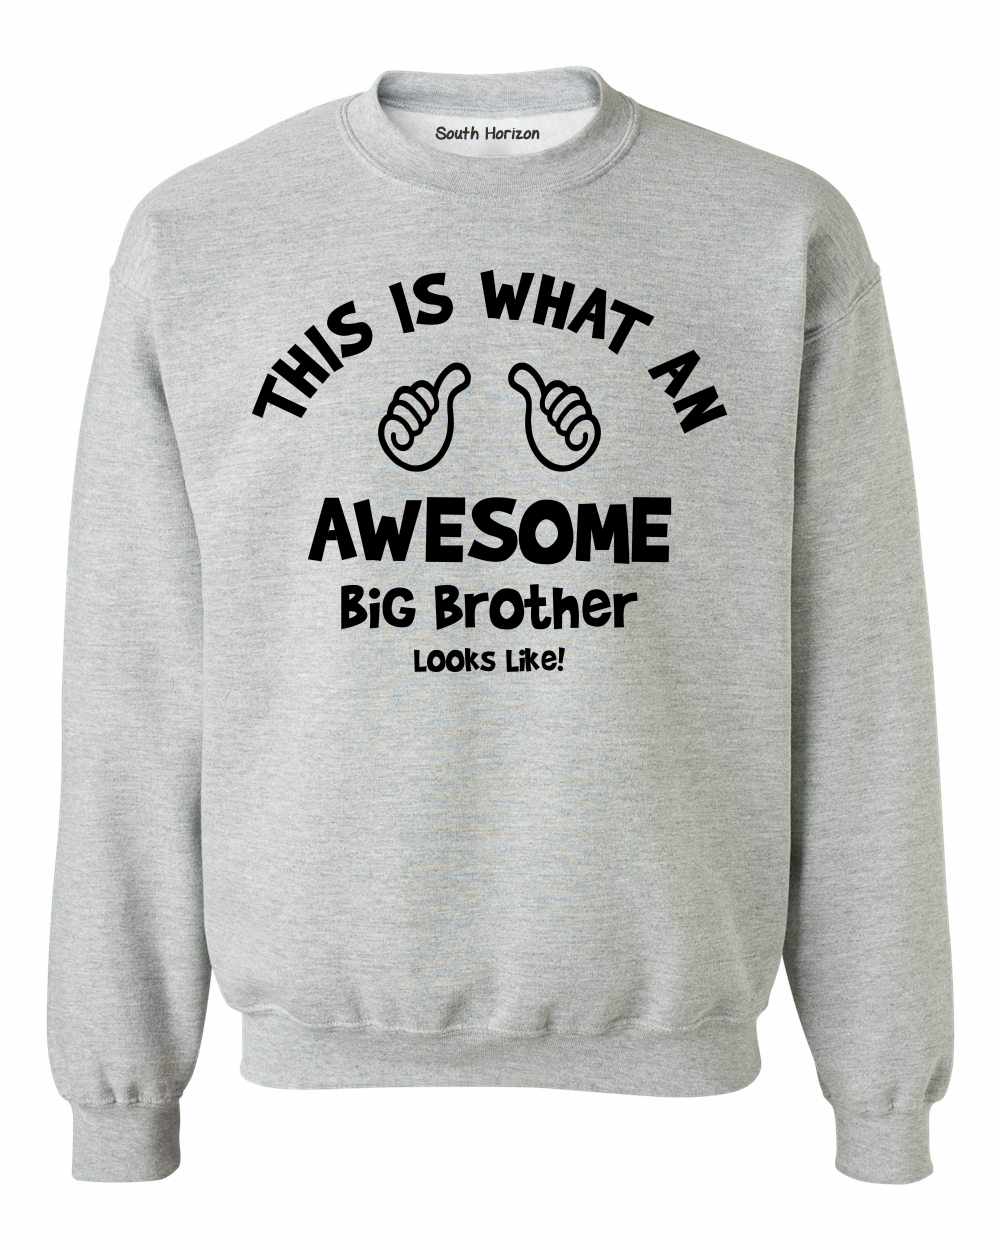 This is What an AWESOME BIG BROTHER Looks Like Sweat Shirt